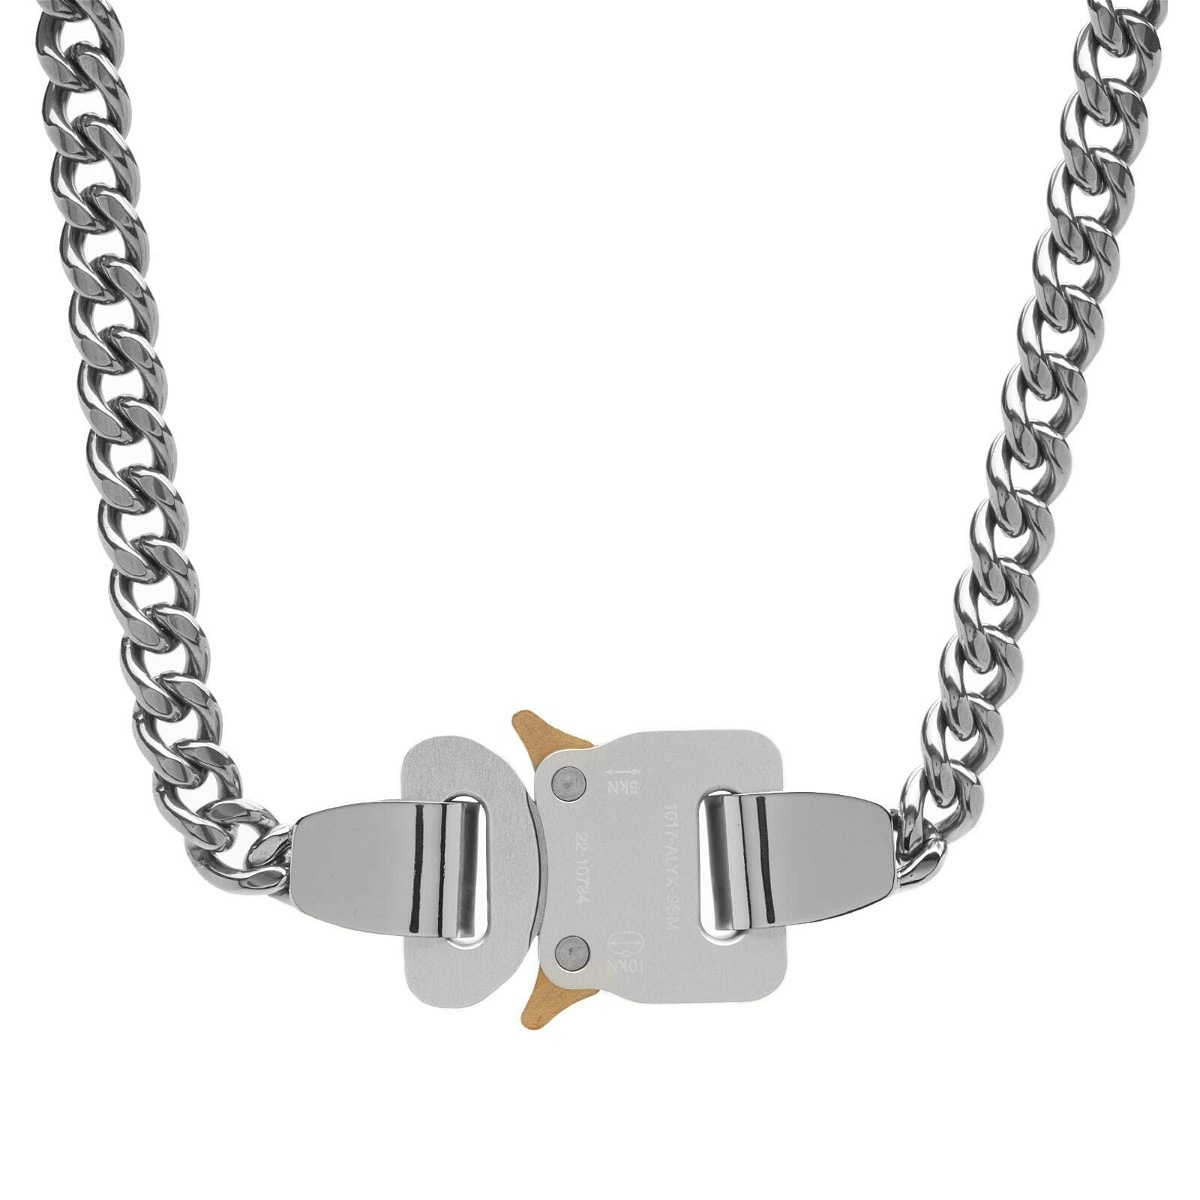 1017 ALYX 9SM Men's Classic Chainlink Necklace in Silver 1017 ALYX 9SM